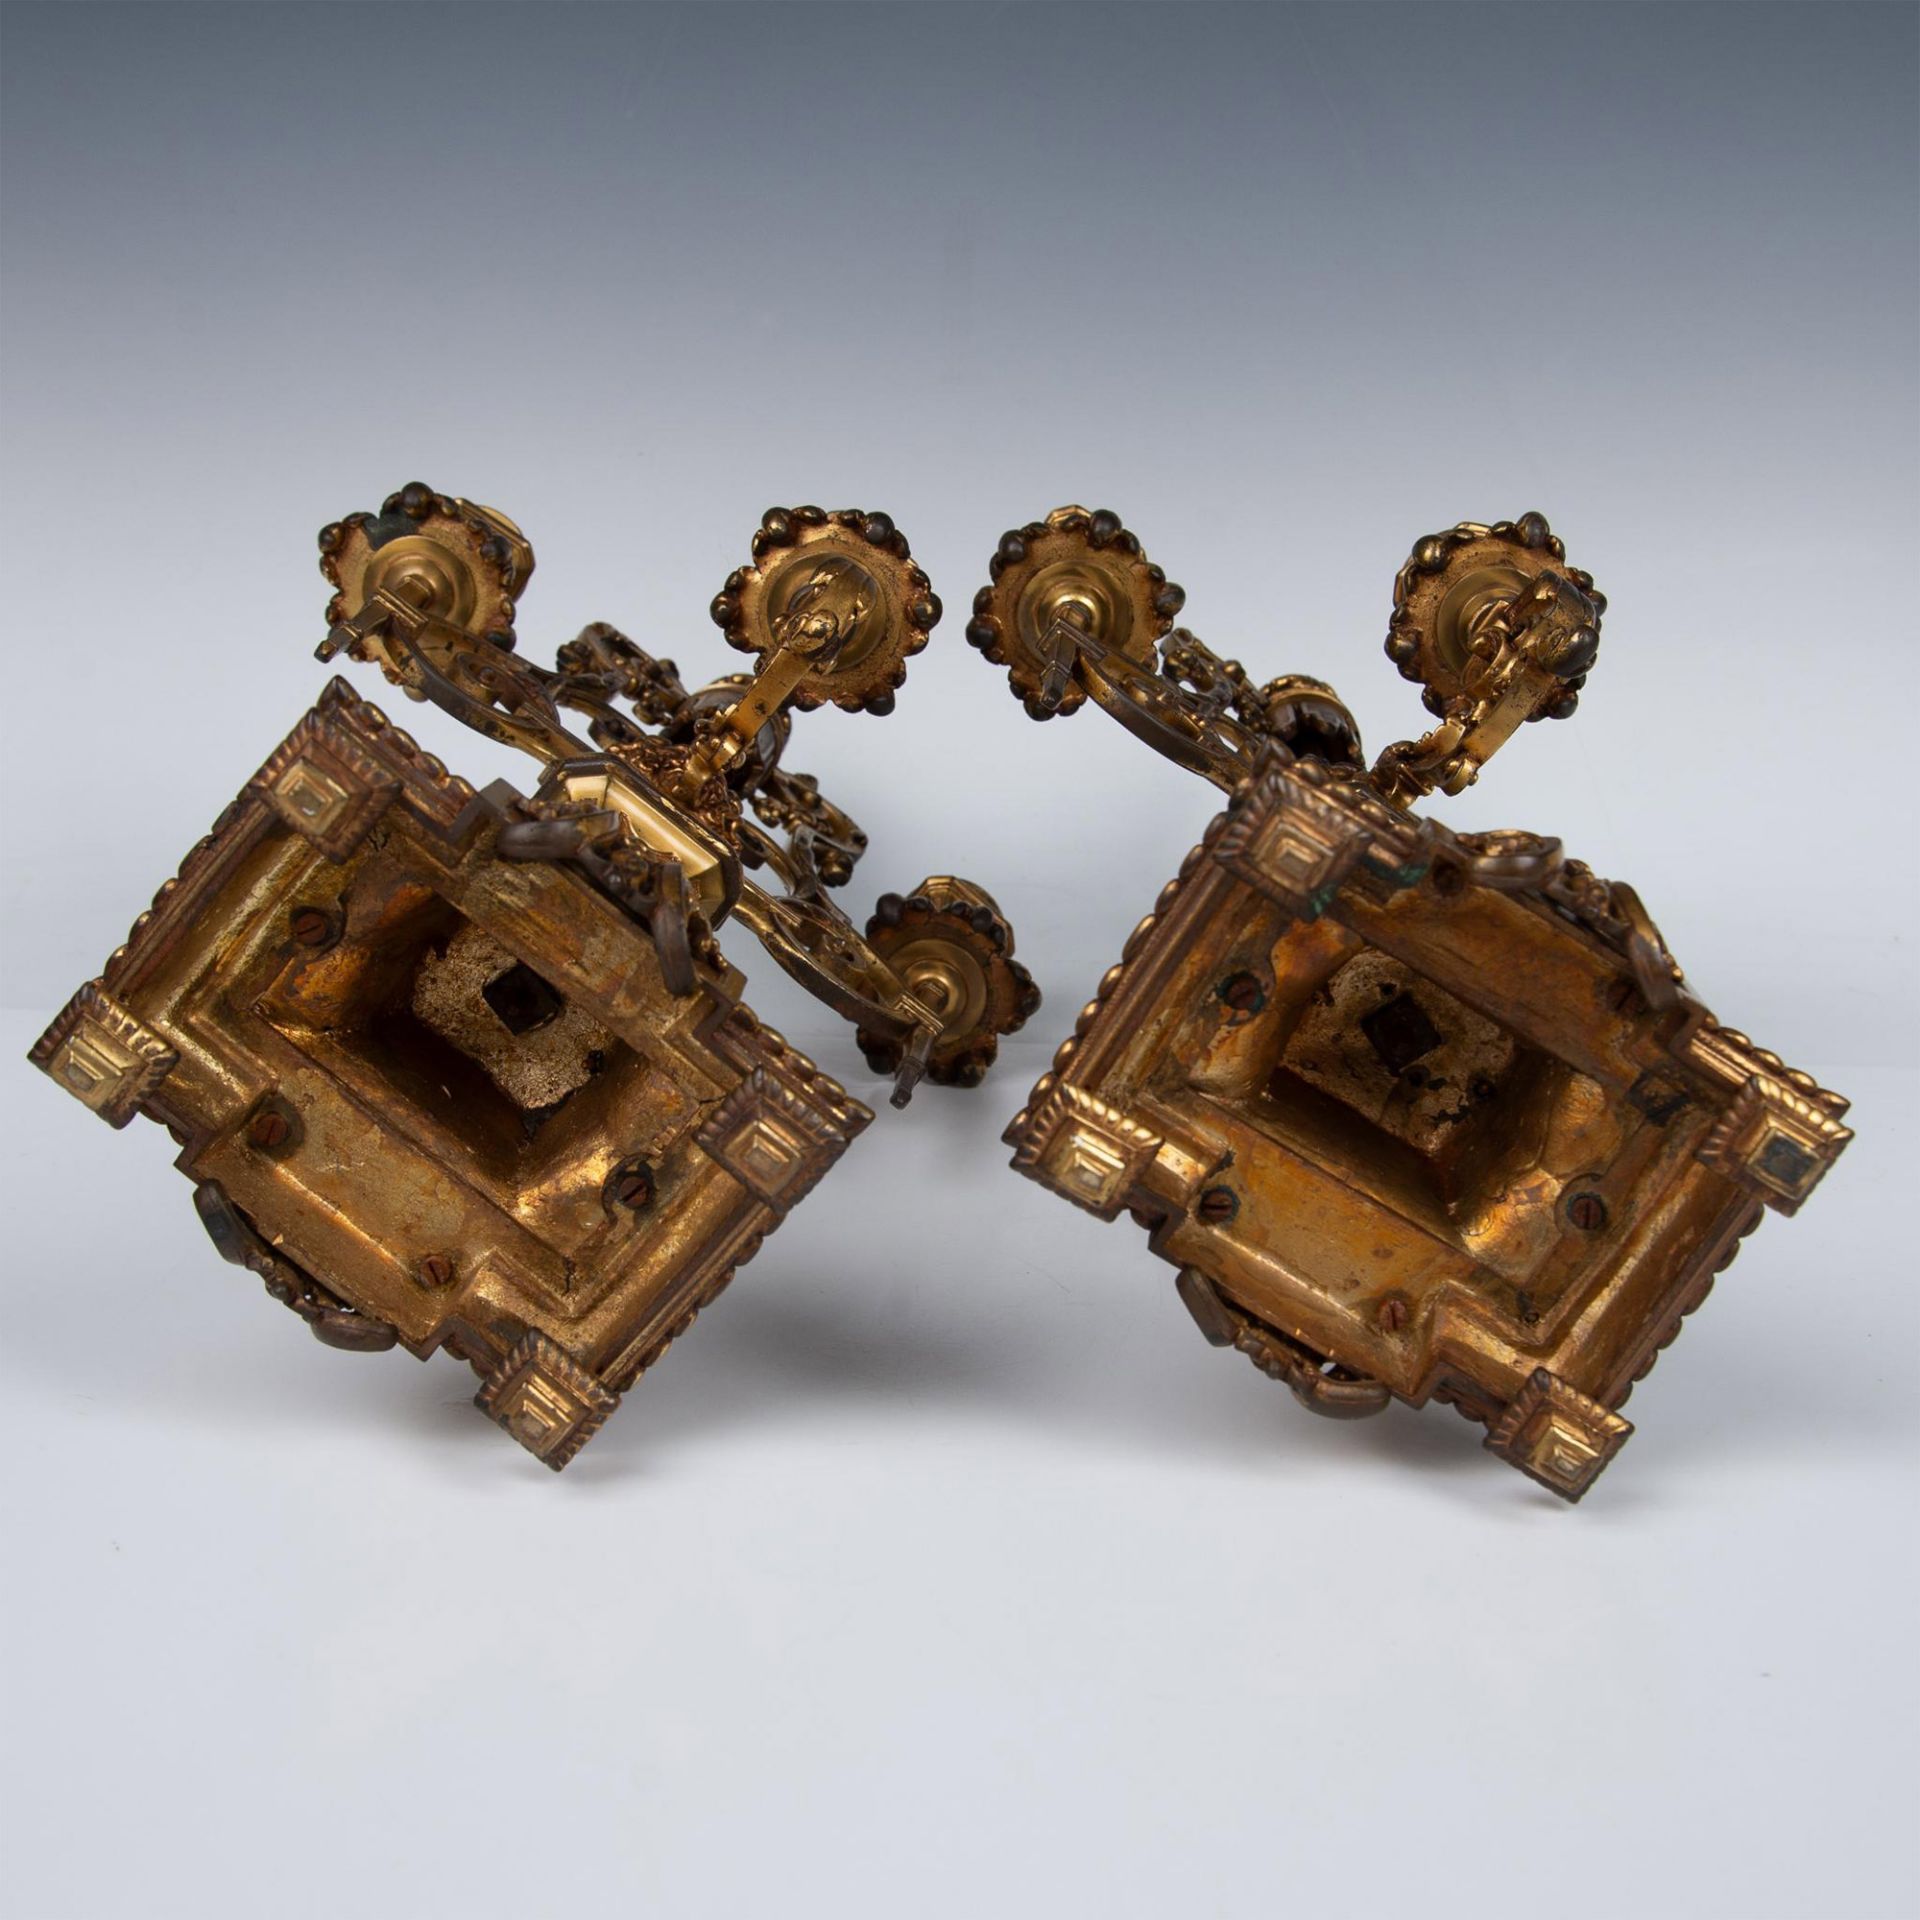 Pair of Brass Baroque Style Candelabras - Image 8 of 8